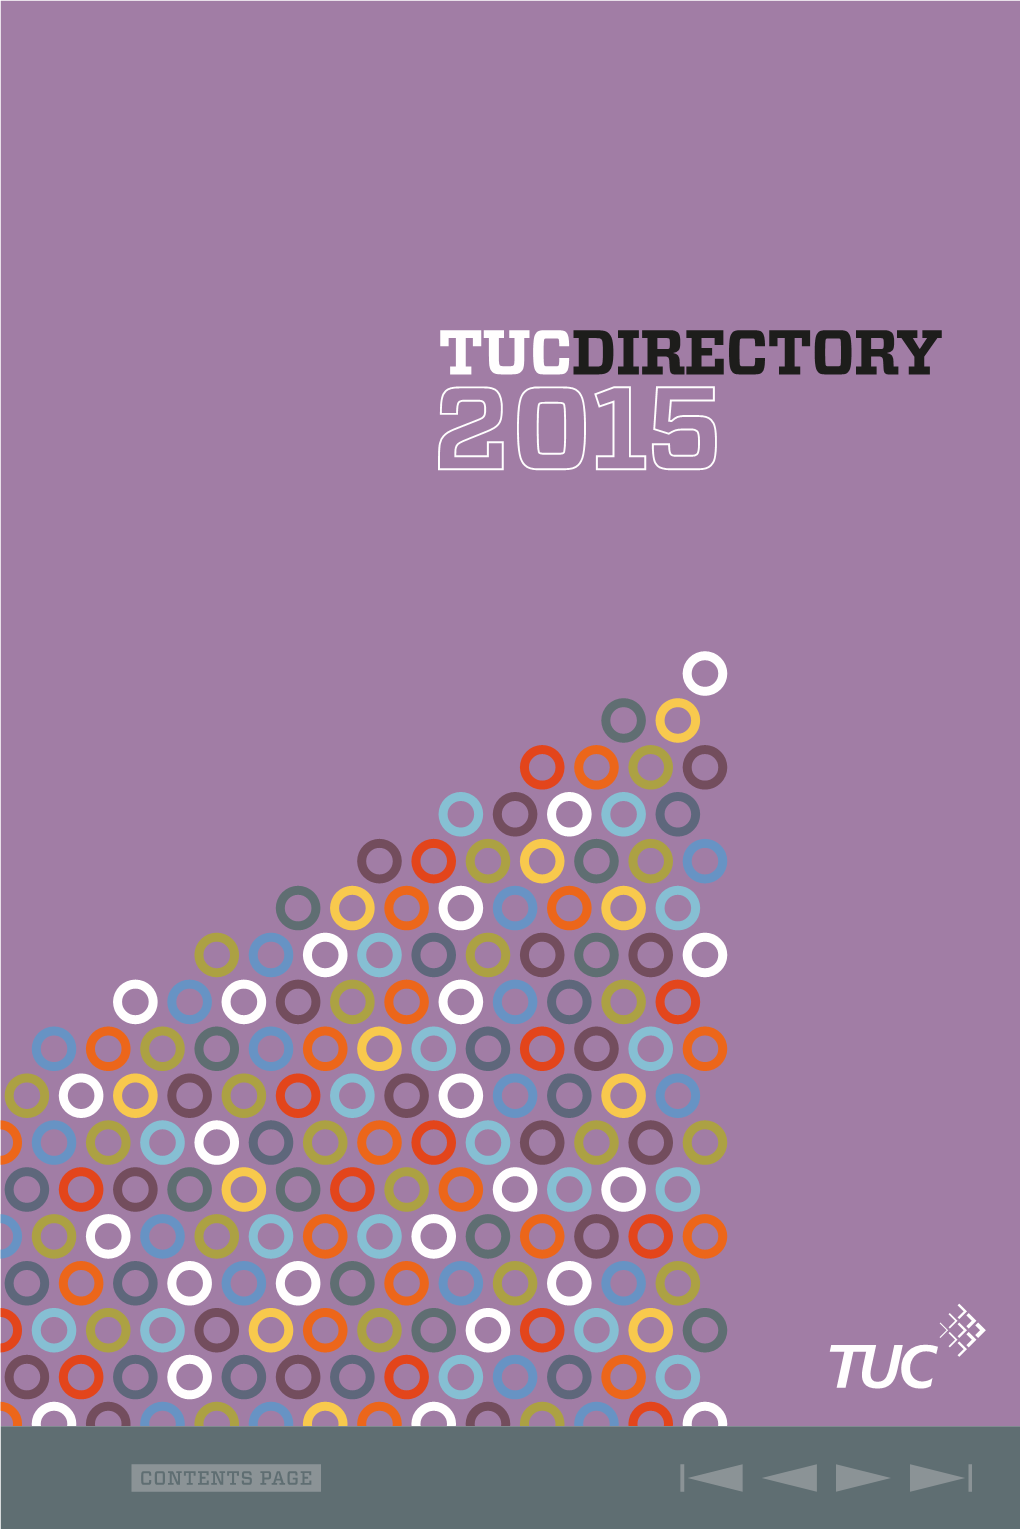 Tucdirectory Trusted by Your Union